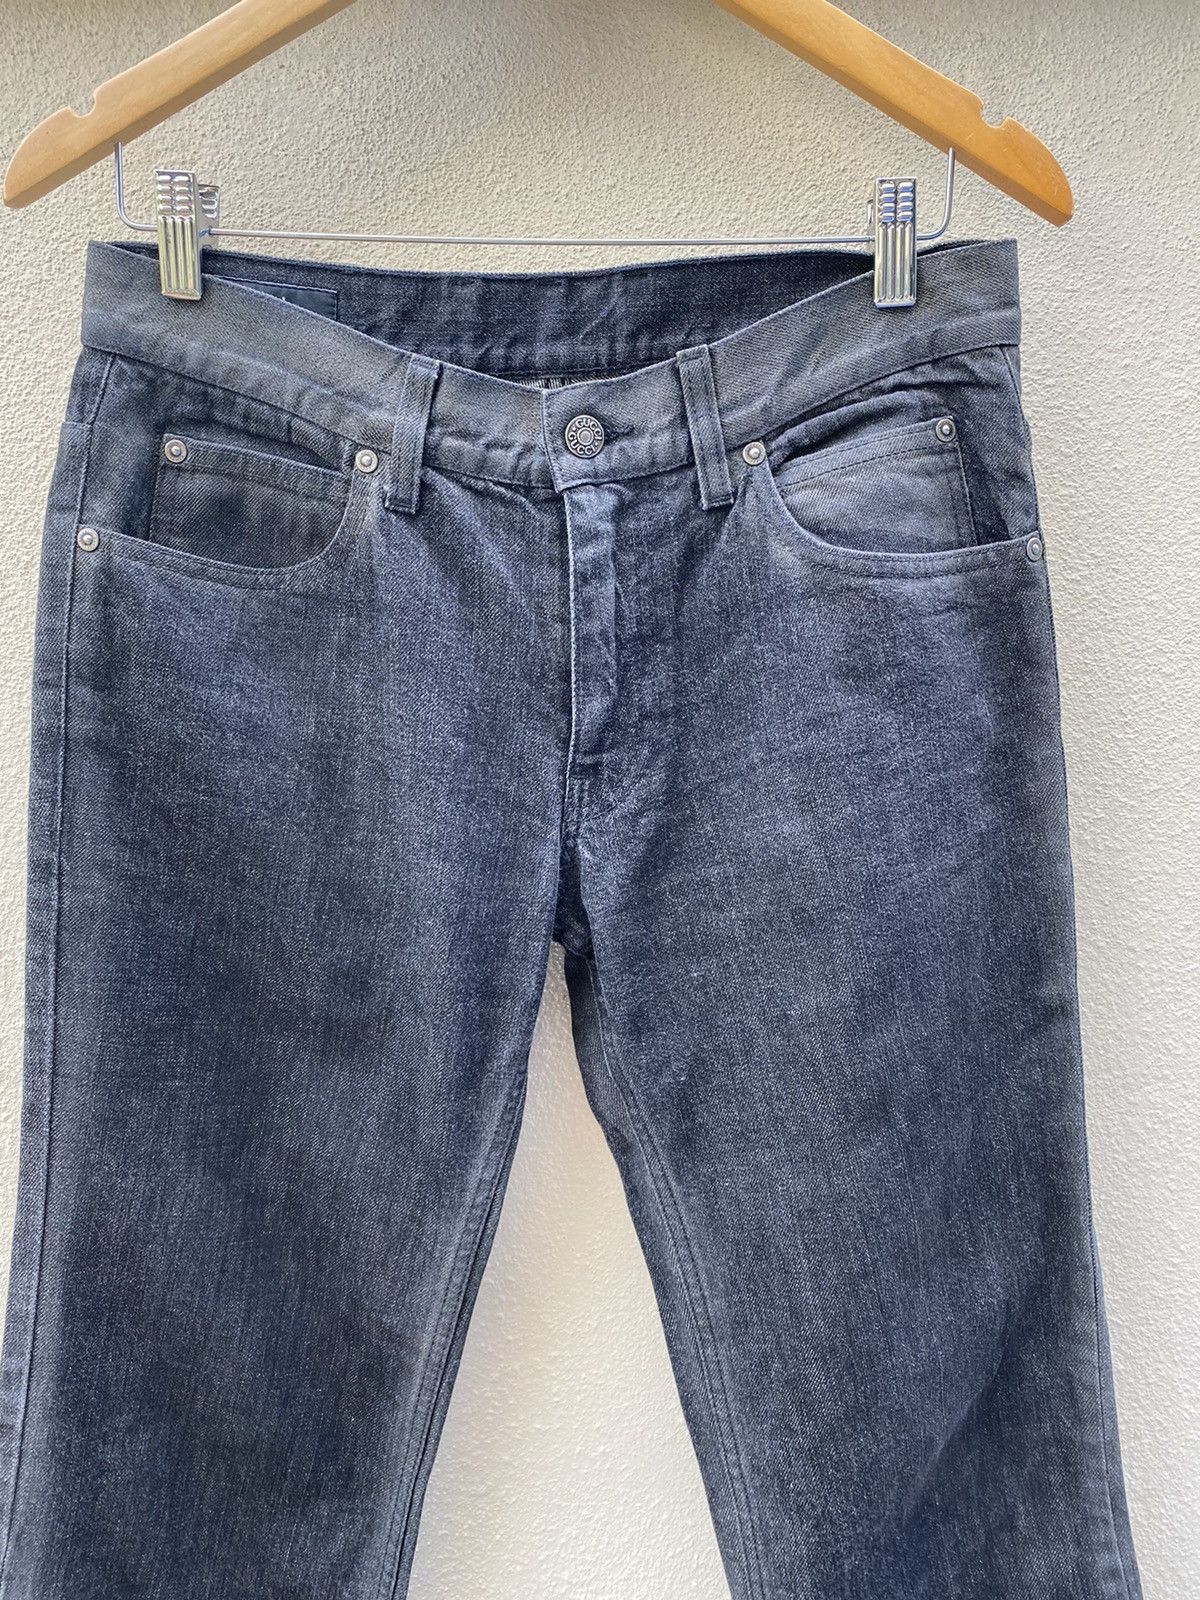 GUCCI Straight Cut Jeans Made in Italy - 2